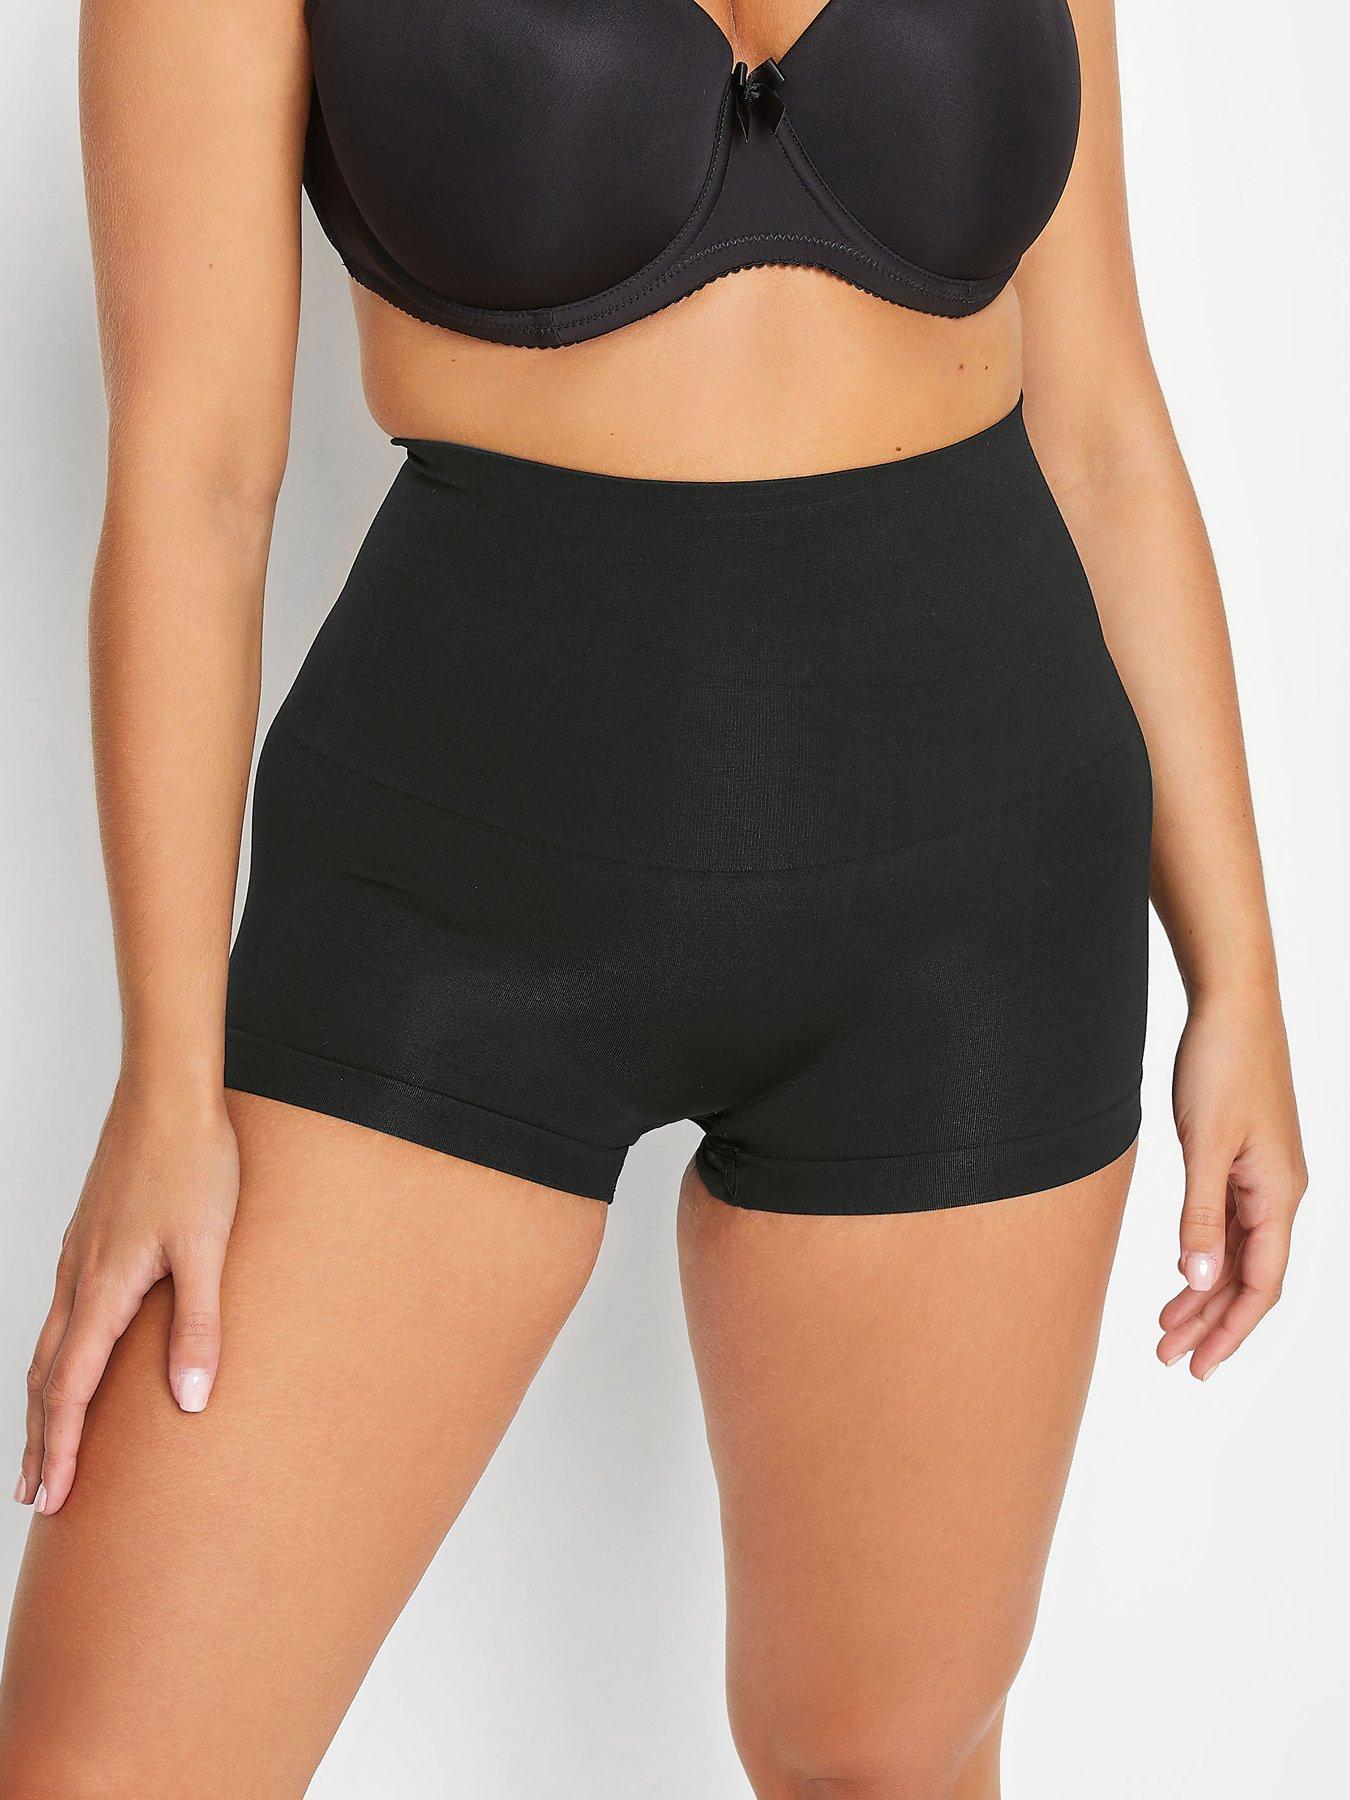 Spanx Spanx Everyday Seamless Shaping High Waisted Short - Nude